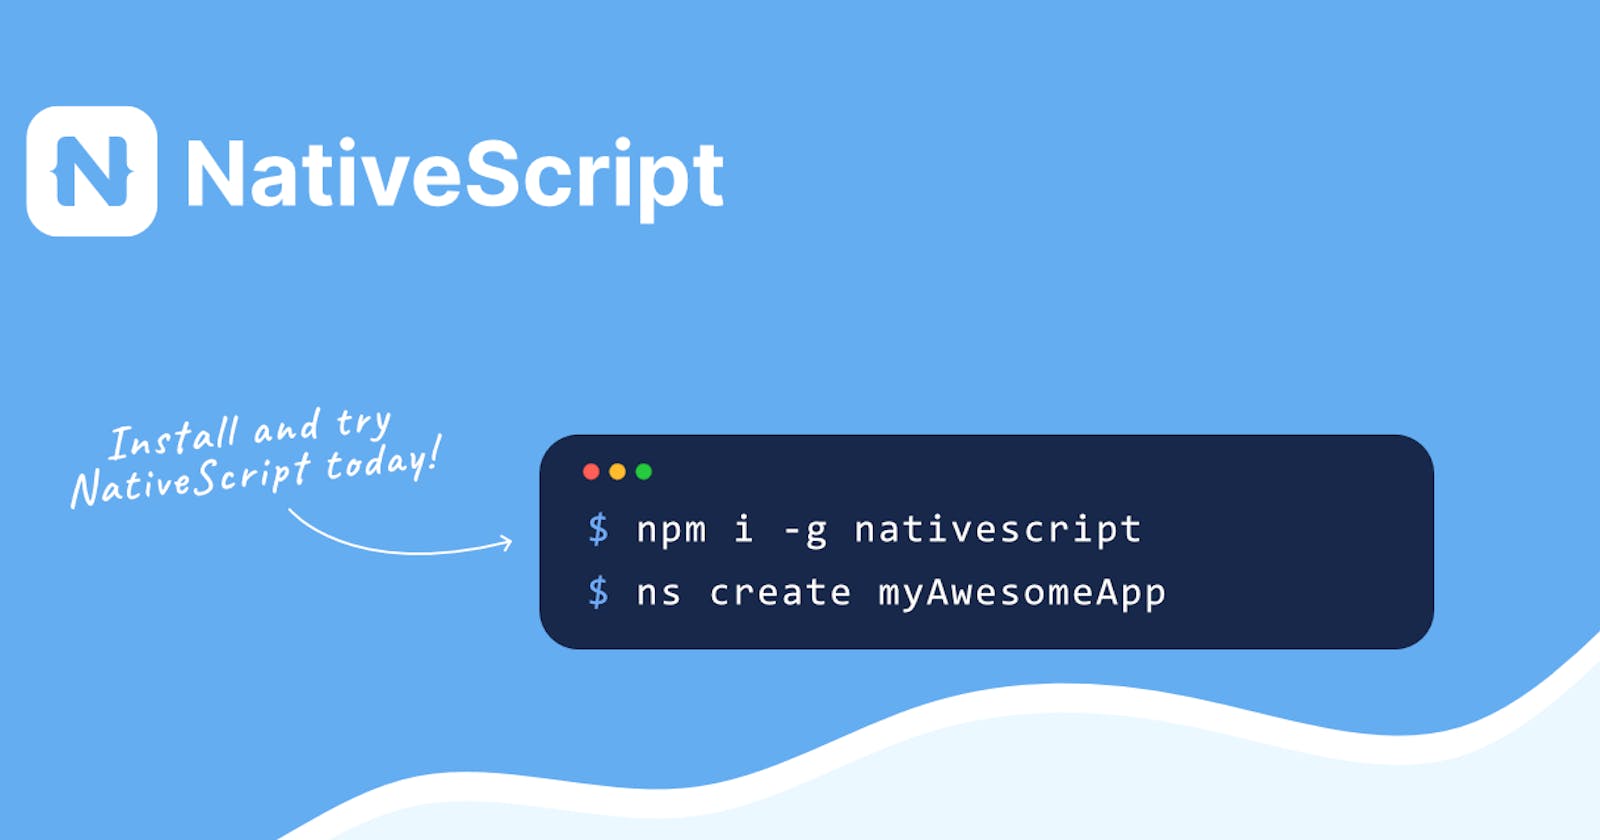 Knowing these 4 things helped me become good at Nativescript